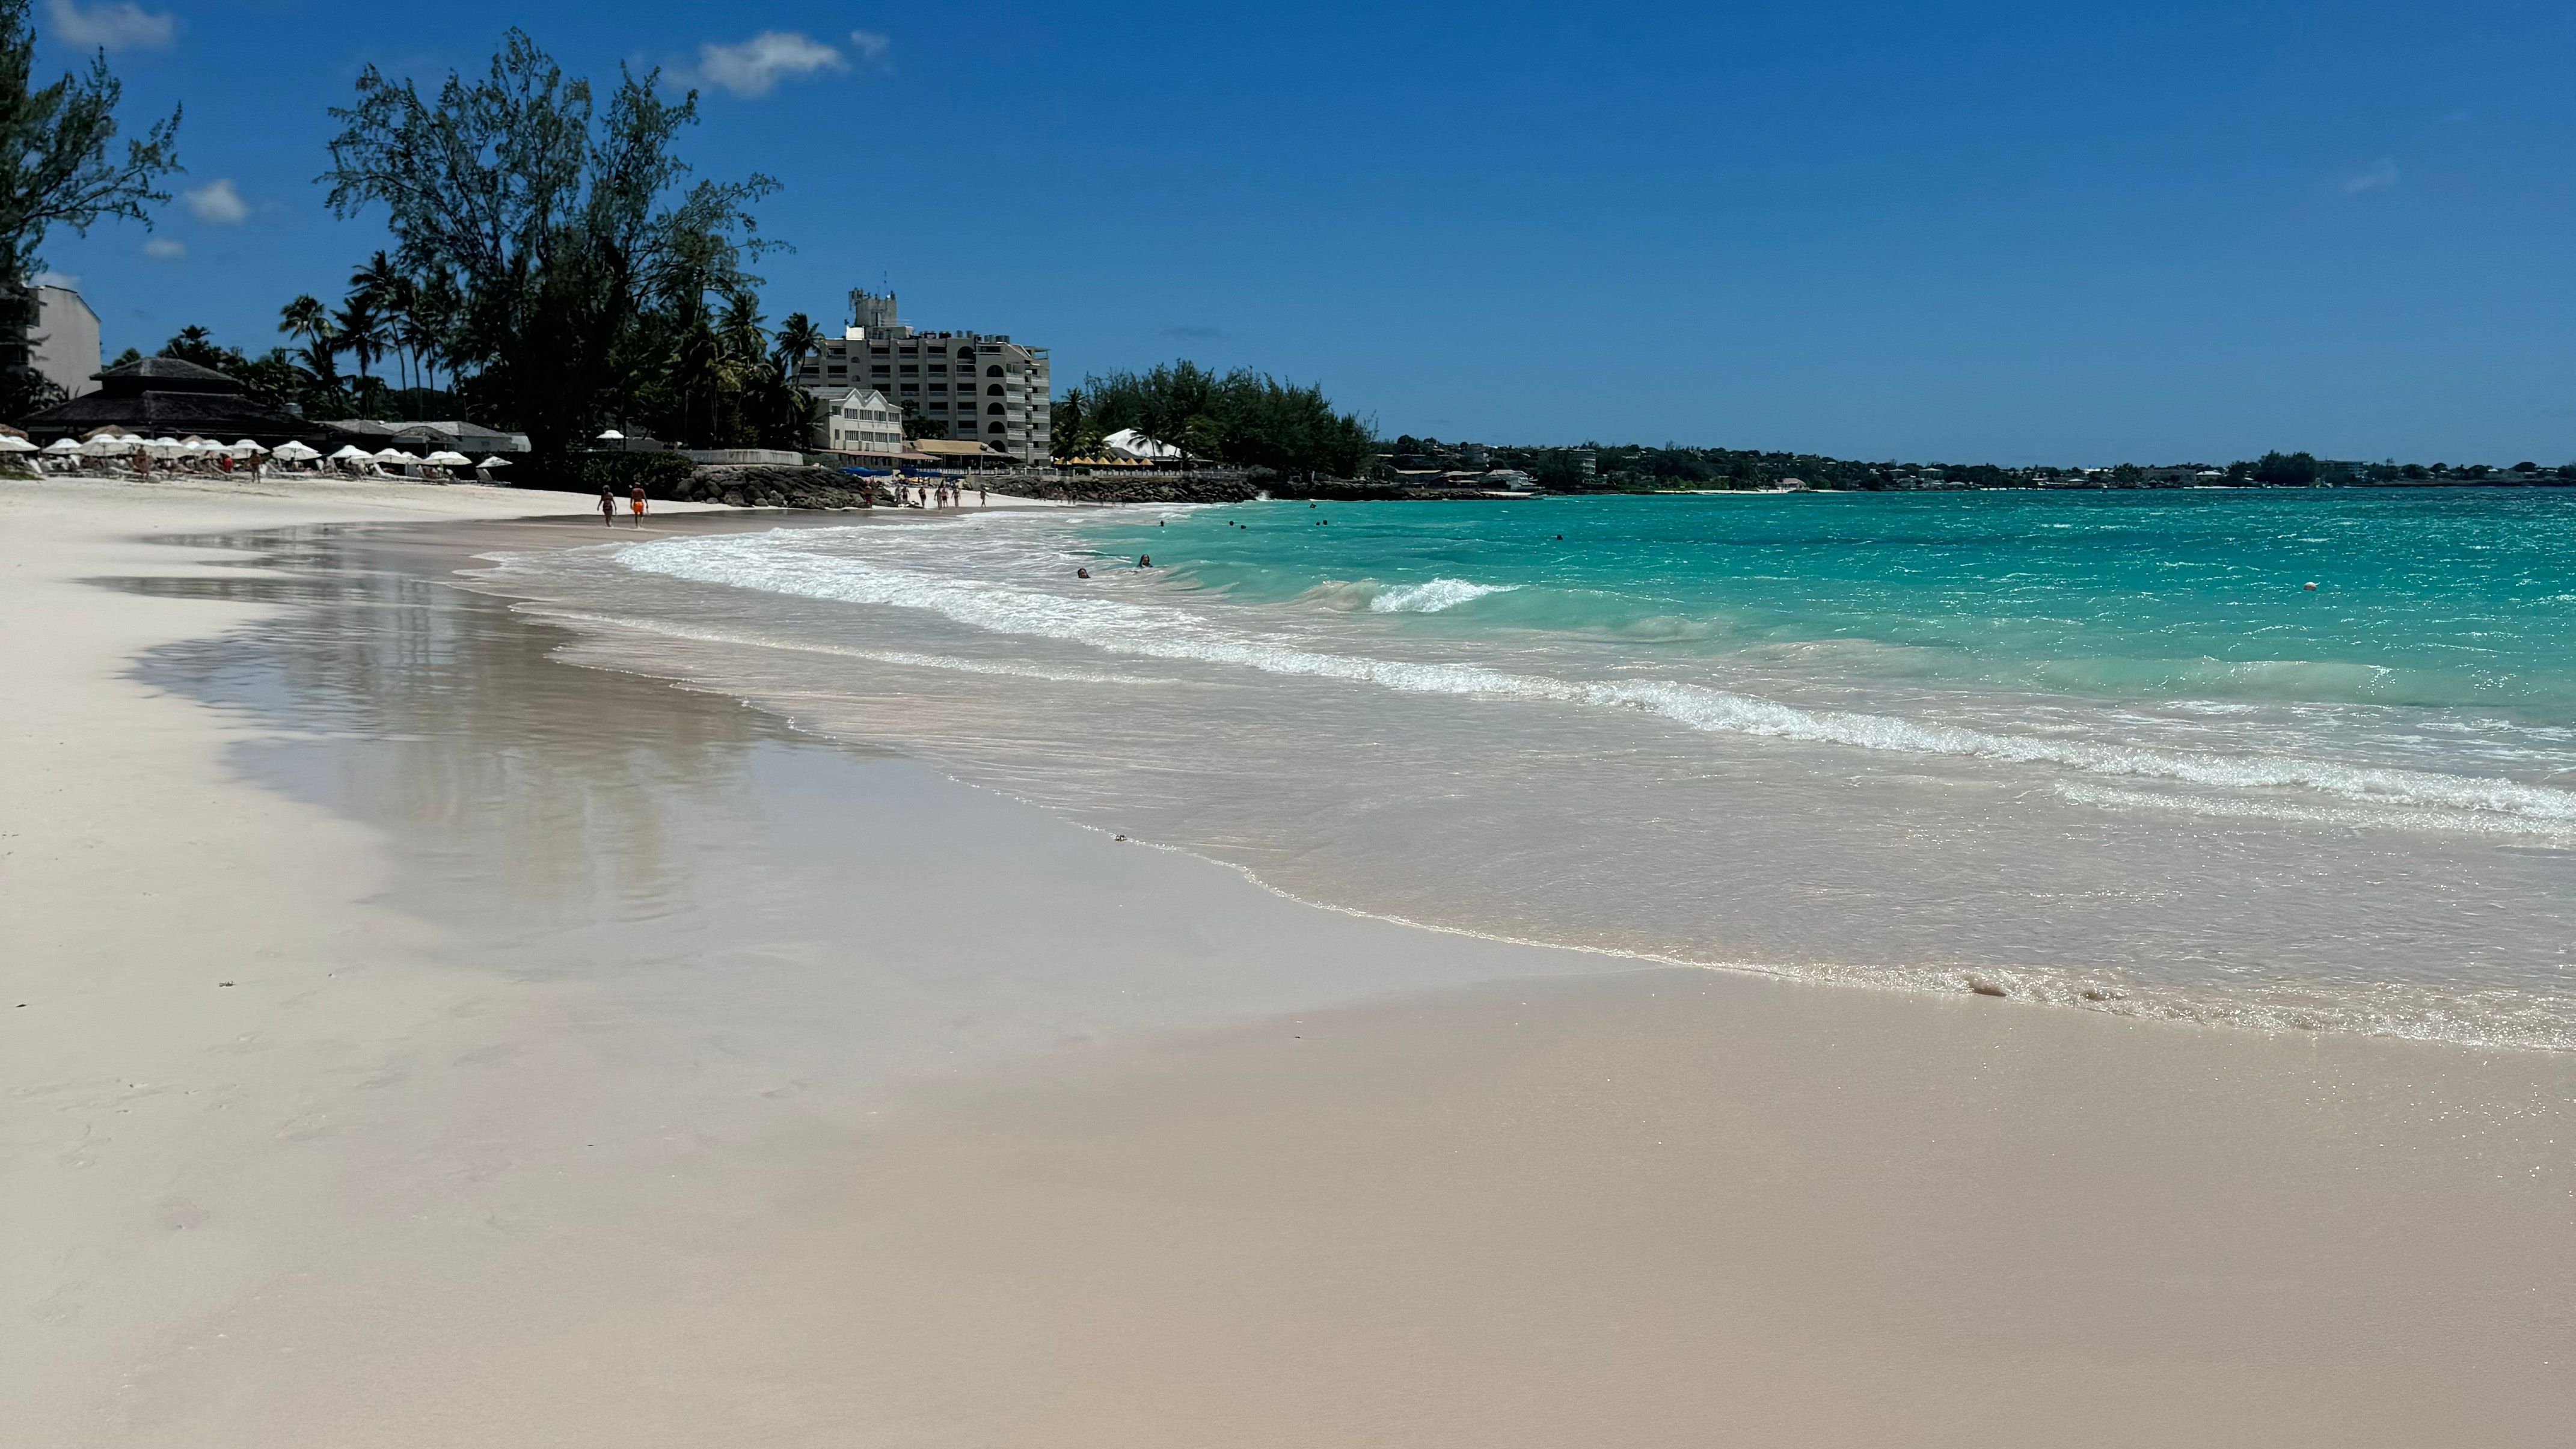 The beach in our lovely Barbados resort